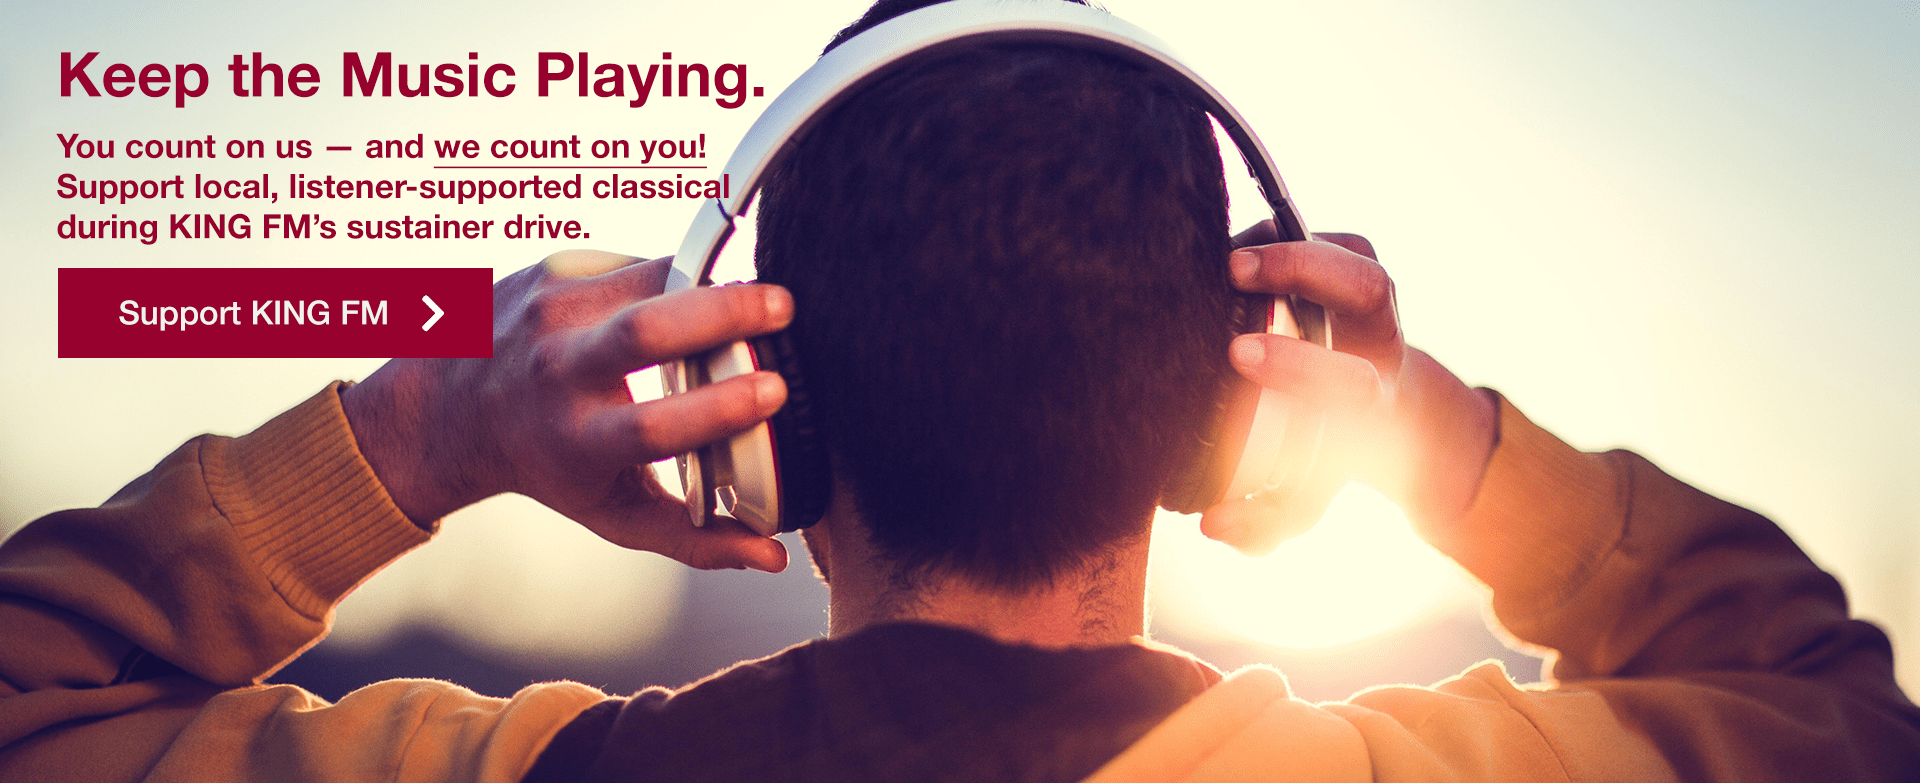 [image of person listening to headphones] Keep the Music Playing. You count on us — and we count on you! Support local, listener-supported classical during KING FM's sustainer drive. | Support KING FM »